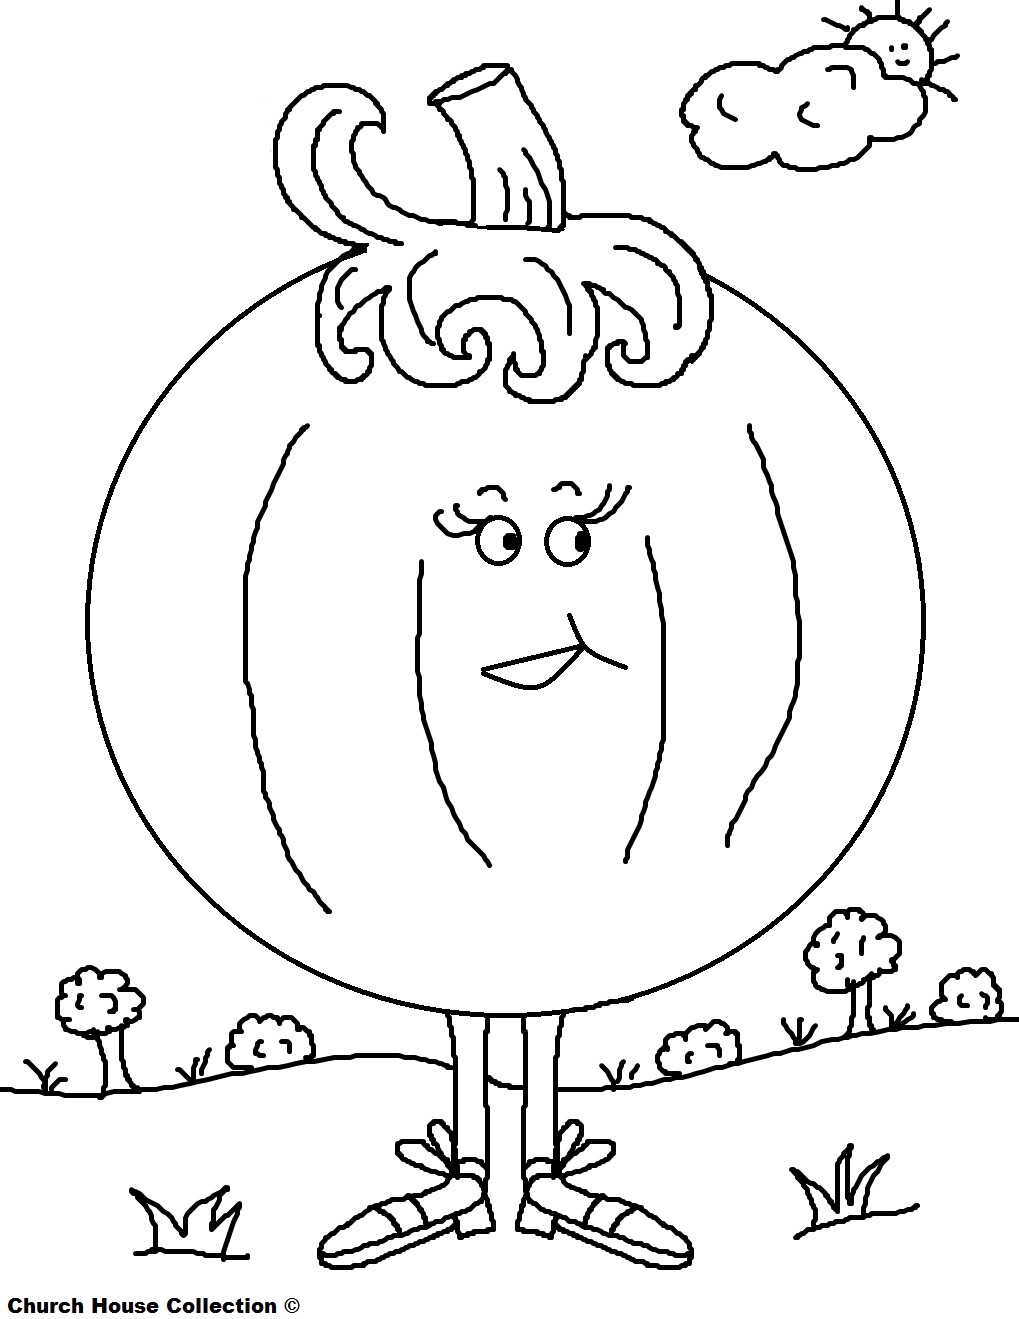 Church House Collection Blog: Free Printable Pumpkin Coloring Pages For